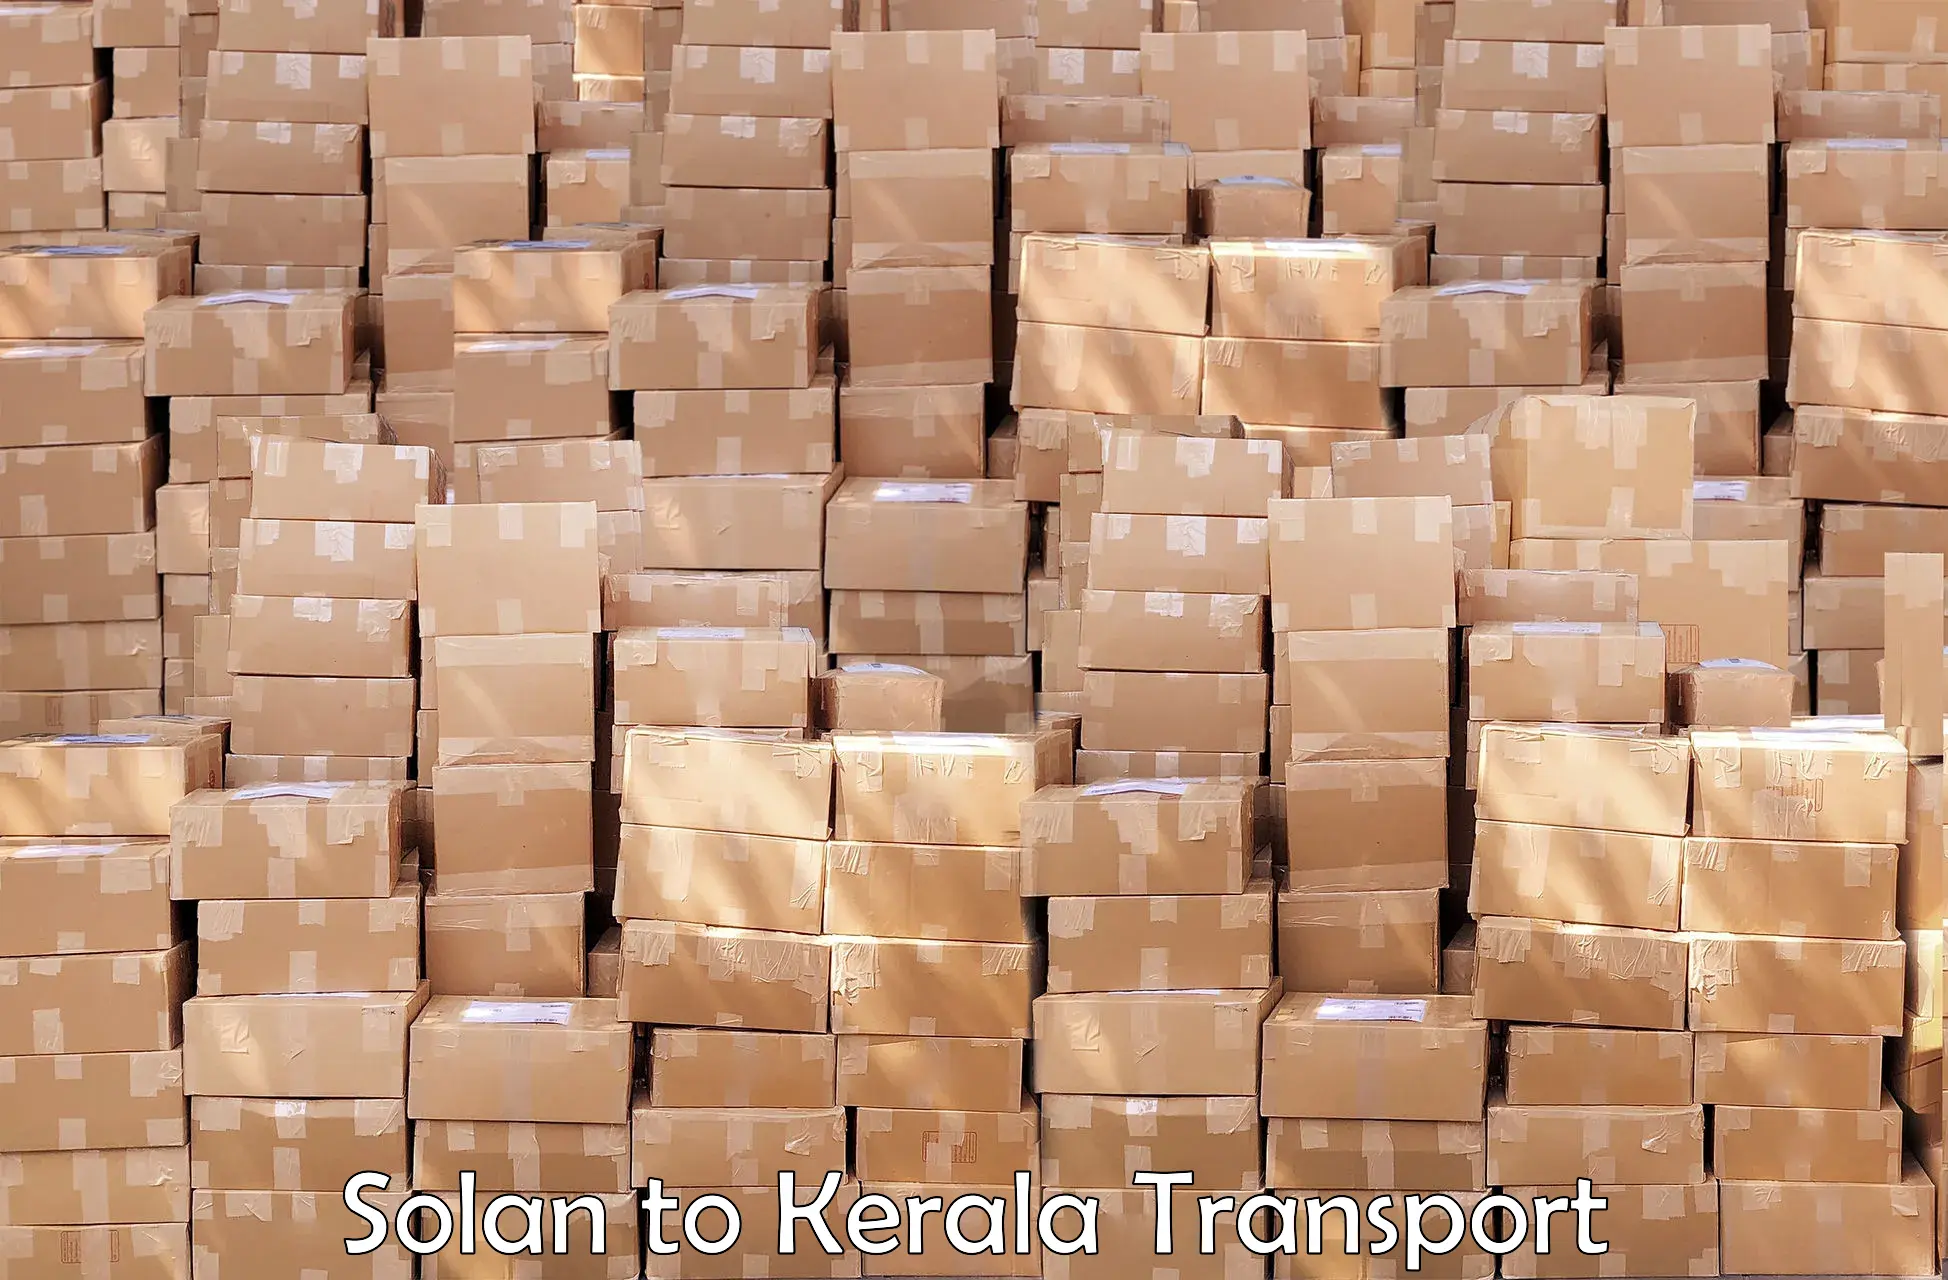 Container transport service Solan to Kerala